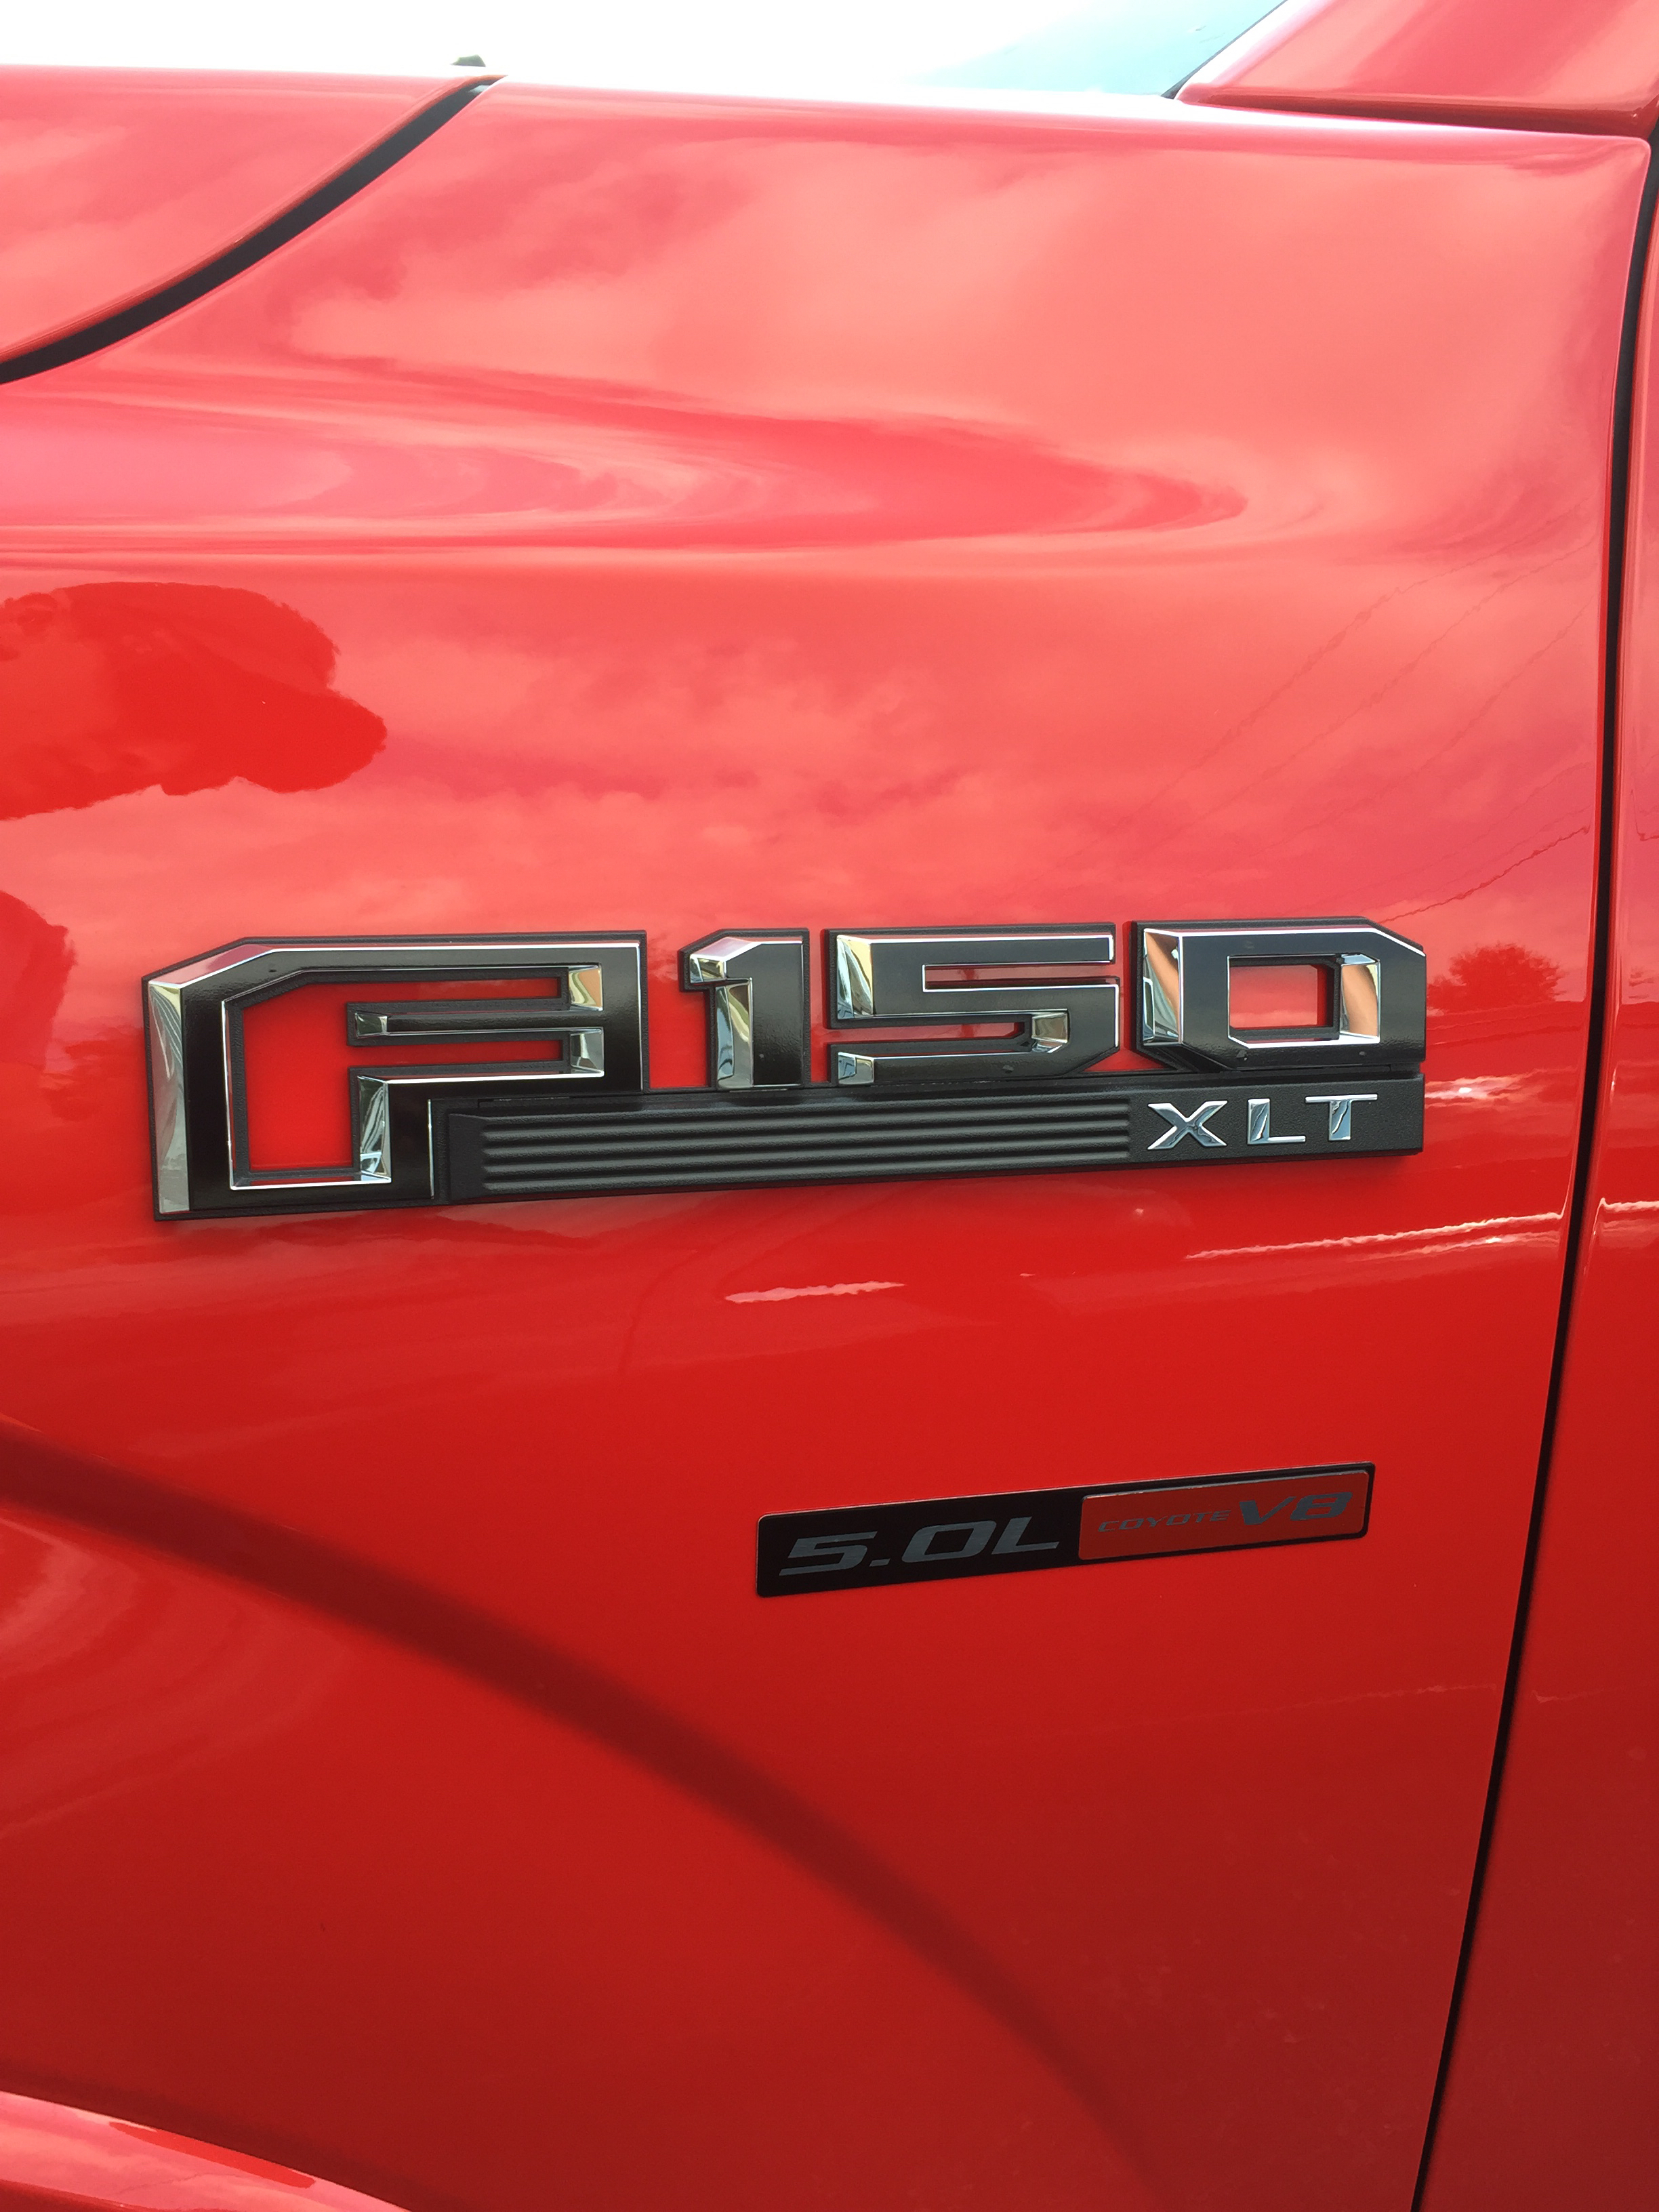 Customized fender and tailgate badges - Ford F150 Forum - Community of ...